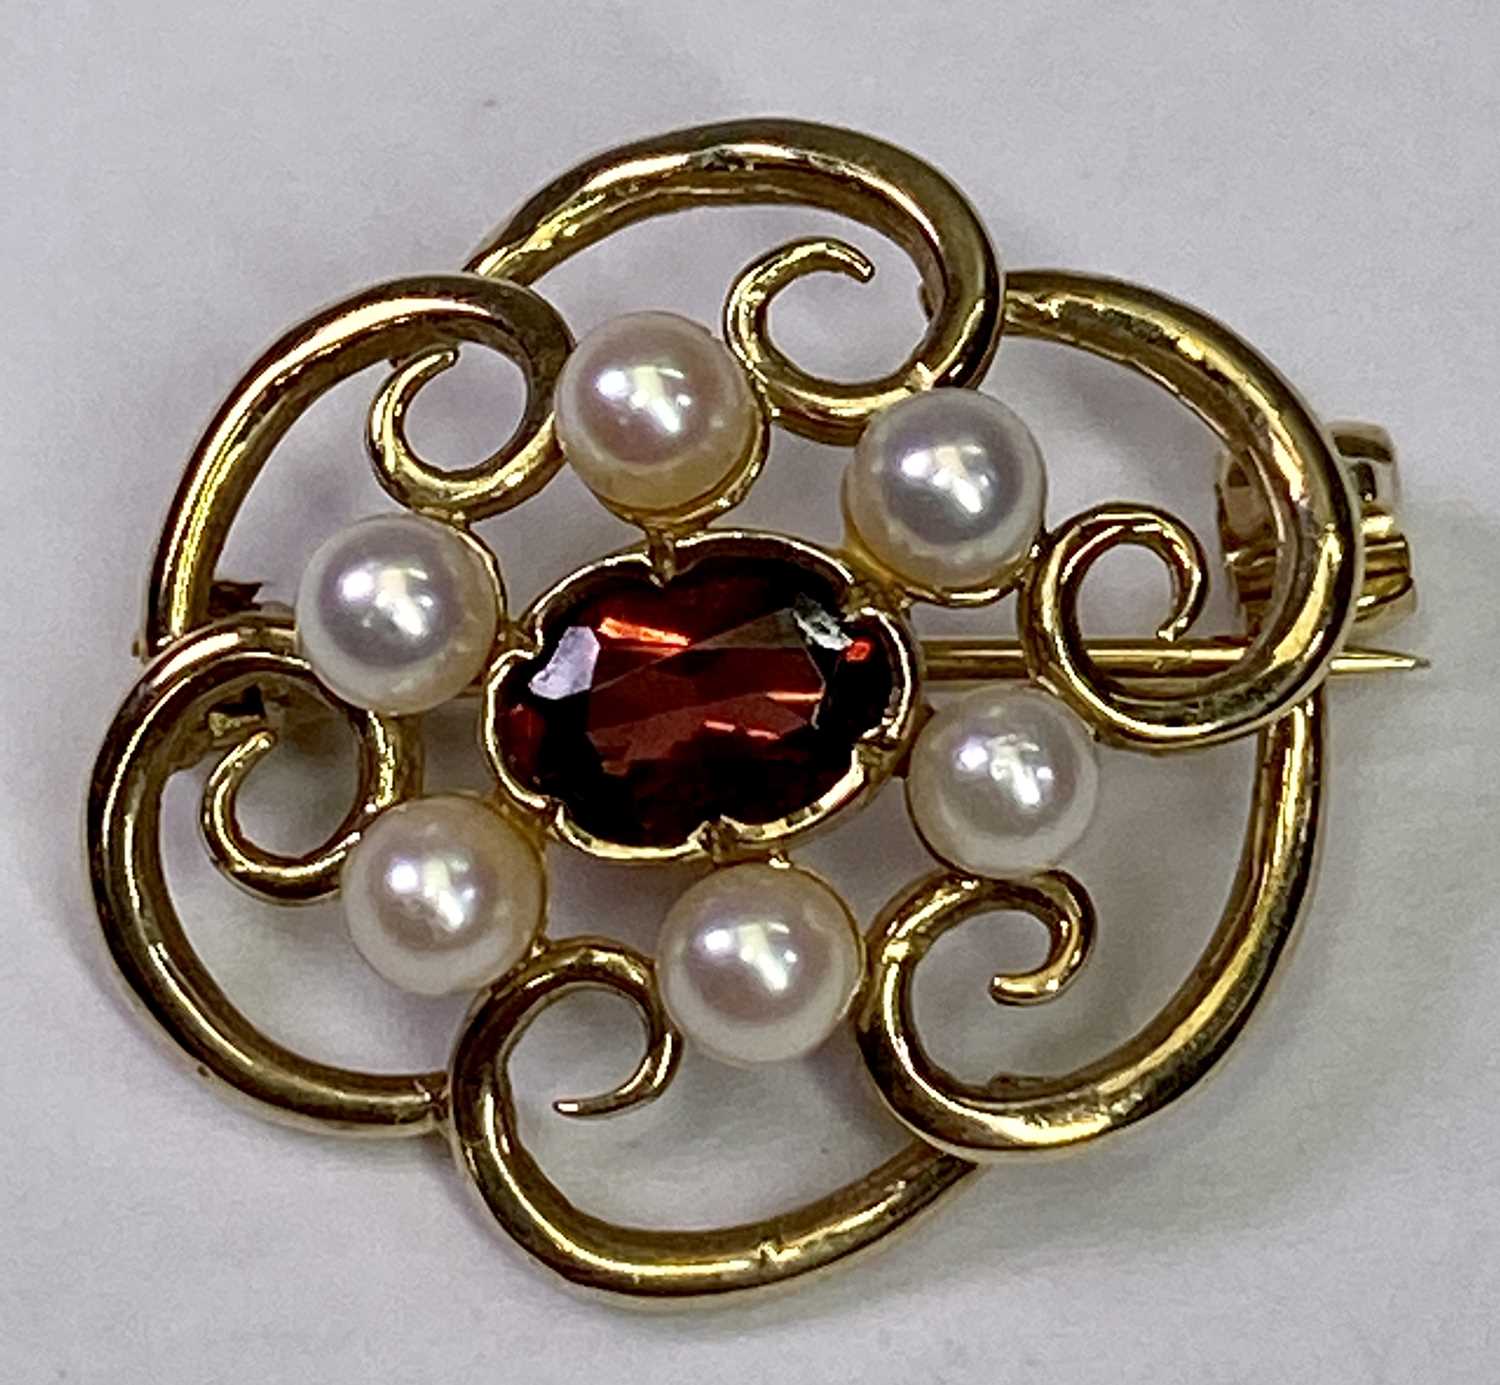 ANTIQUE 9CT GOLD OPENWORK BROOCH - with centrally mounted garnet and seed pearl surround, 22 x 19mm,